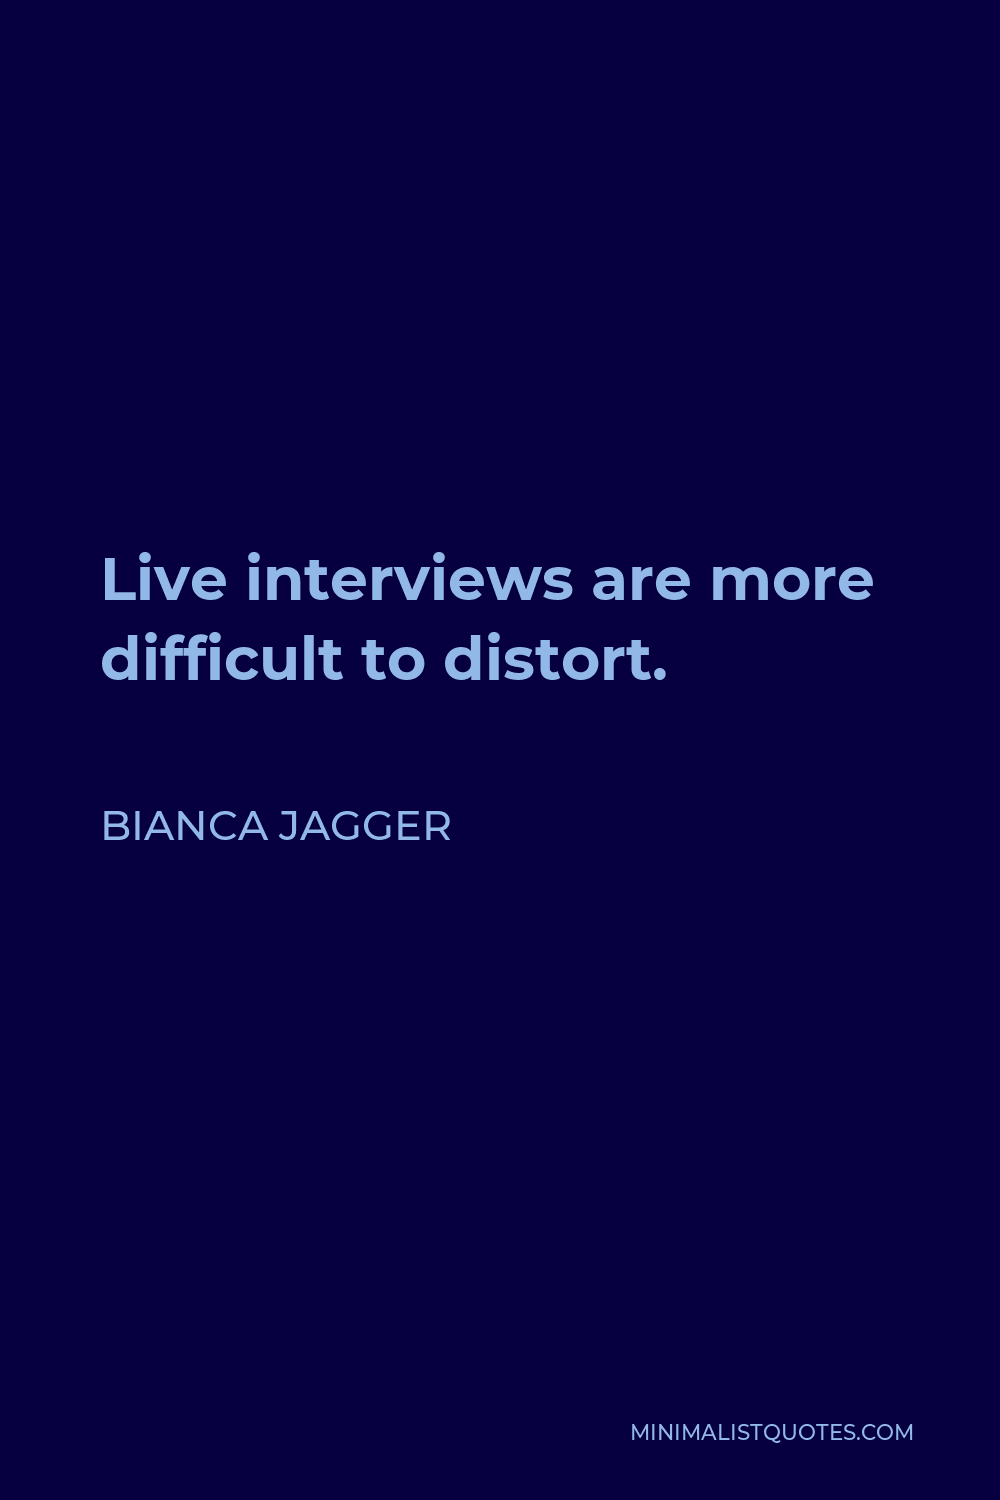 Bianca Jagger Quote - Live interviews are more difficult to distort.